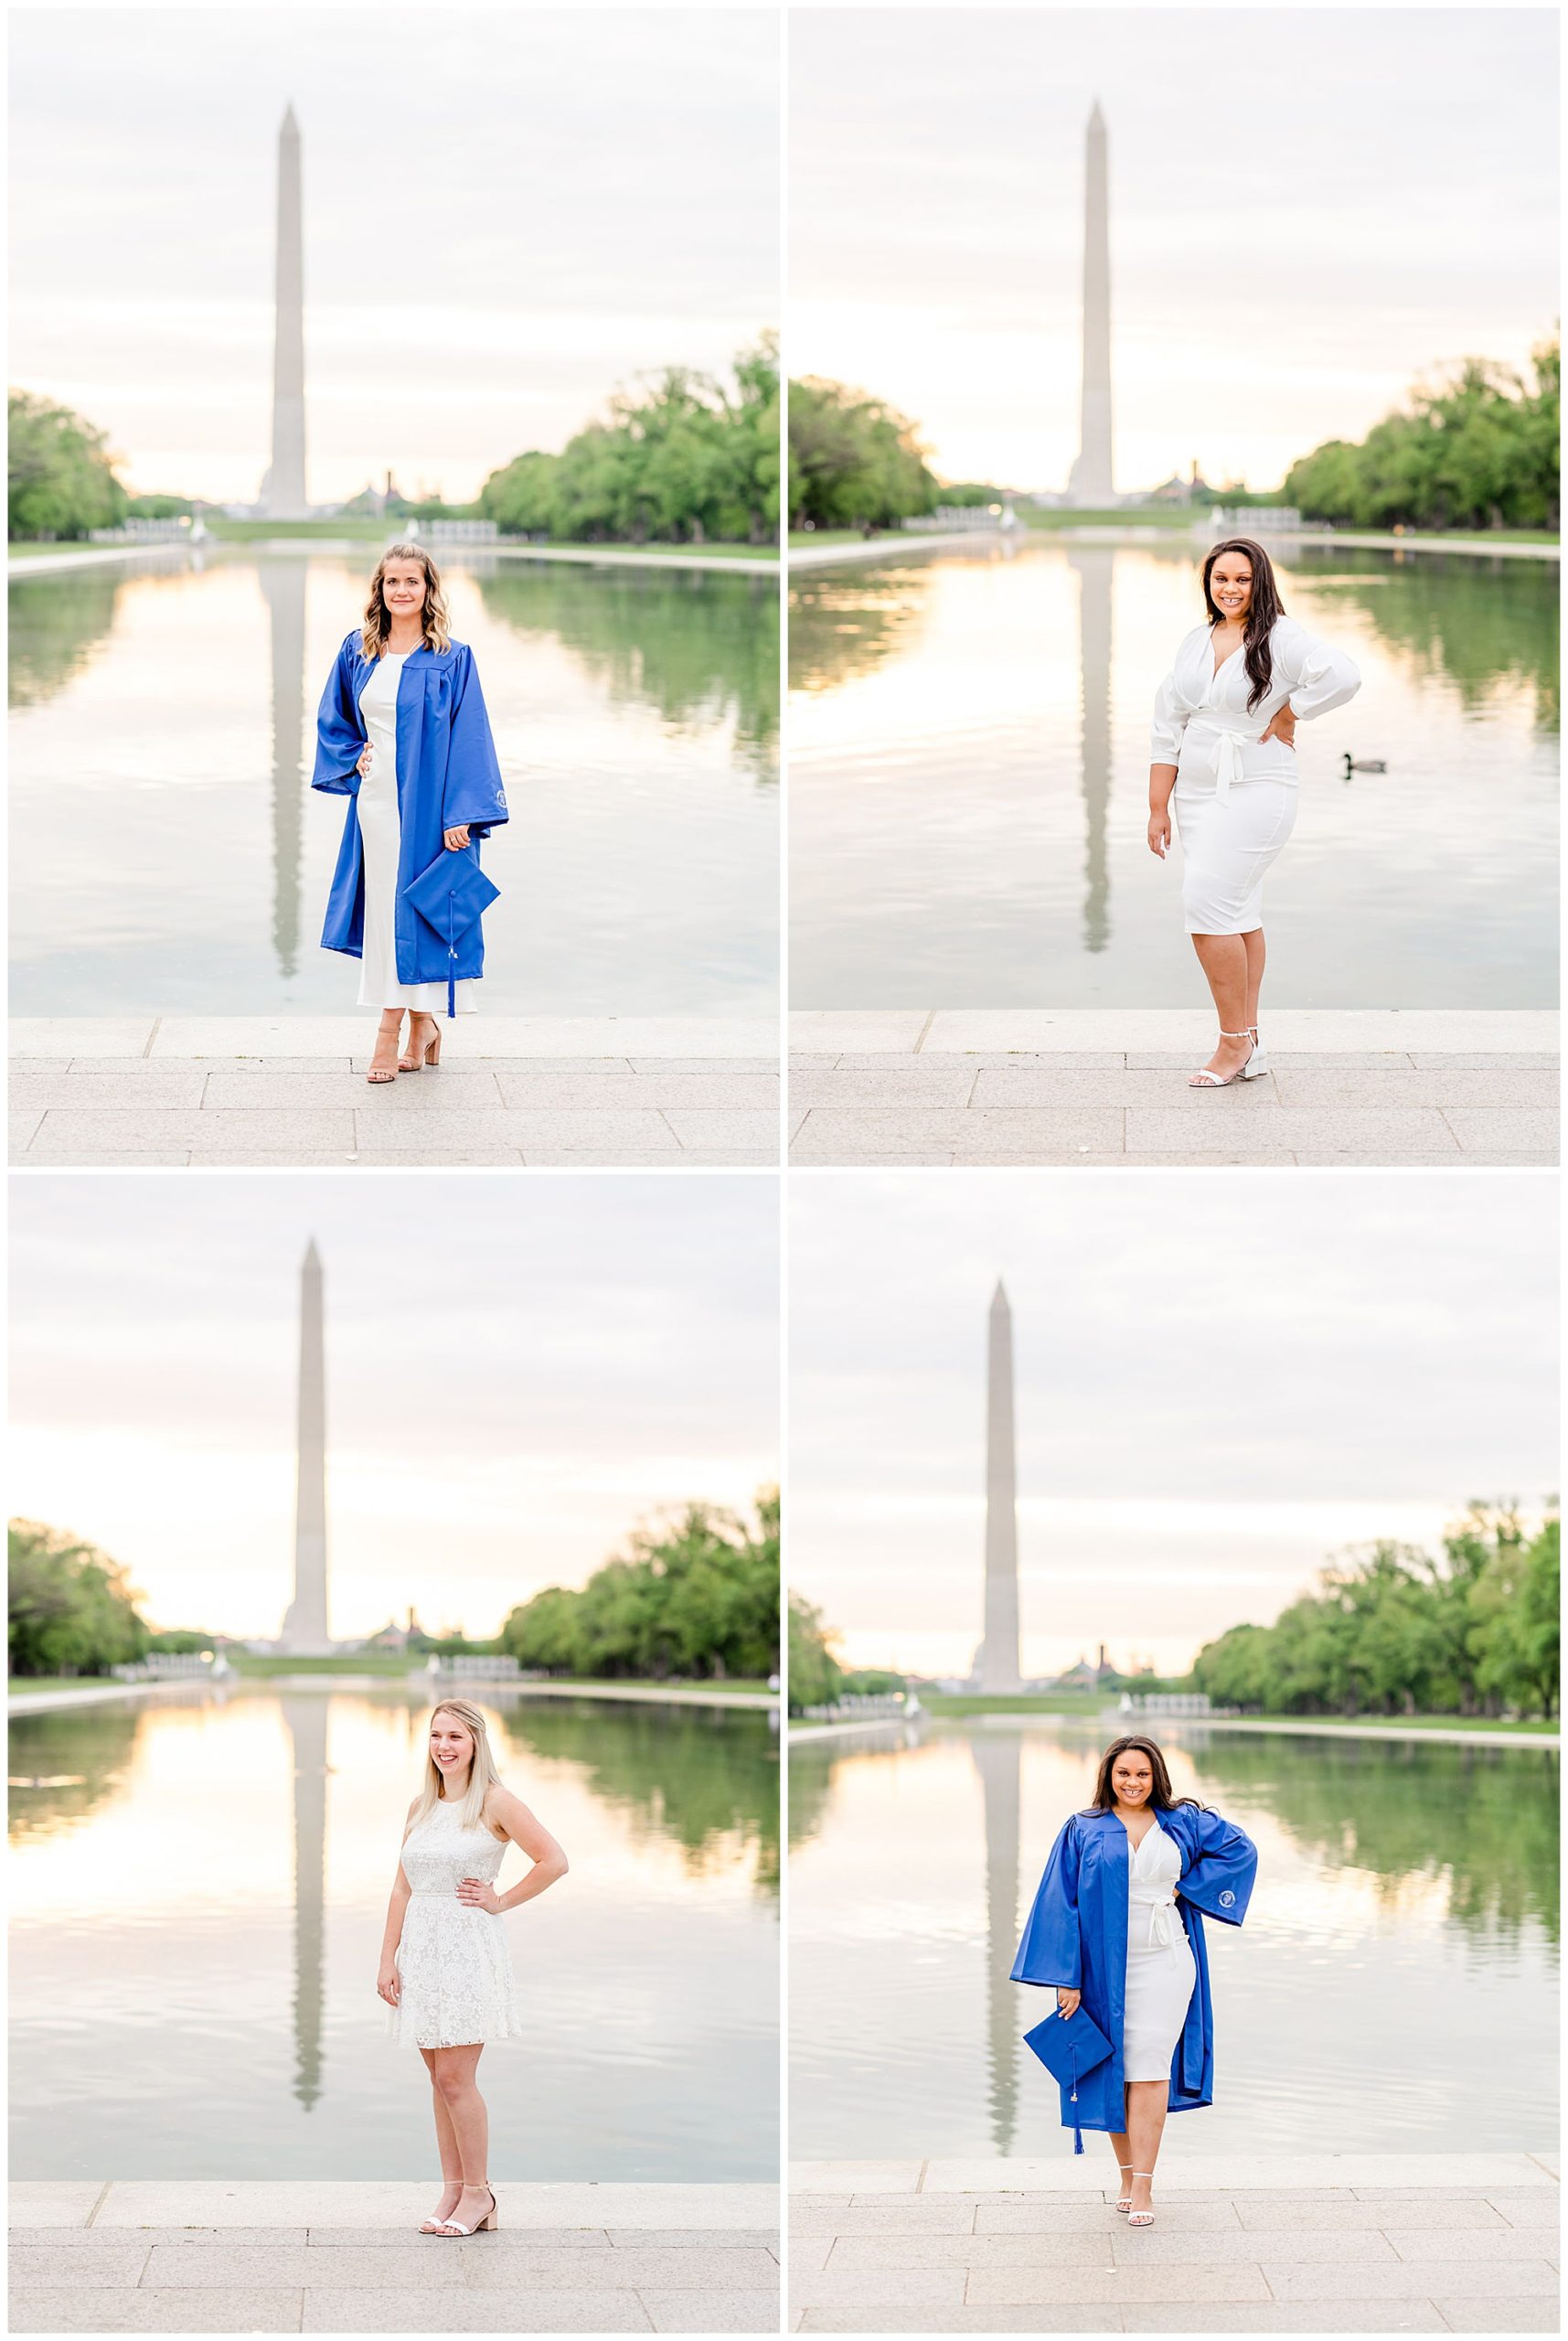 Marymount group graduation photos, LIncoln Memorial group graduation phtoos, Lincoln Memorial graduation photos, Lincoln memorial portraits, D.C. graduates, Washington D.C. universities, Marymount University graduates, Rachel E.H. Photography, blonde woman smiling with hand on hip, woman in front of reflecting pool, woman in graduation gown